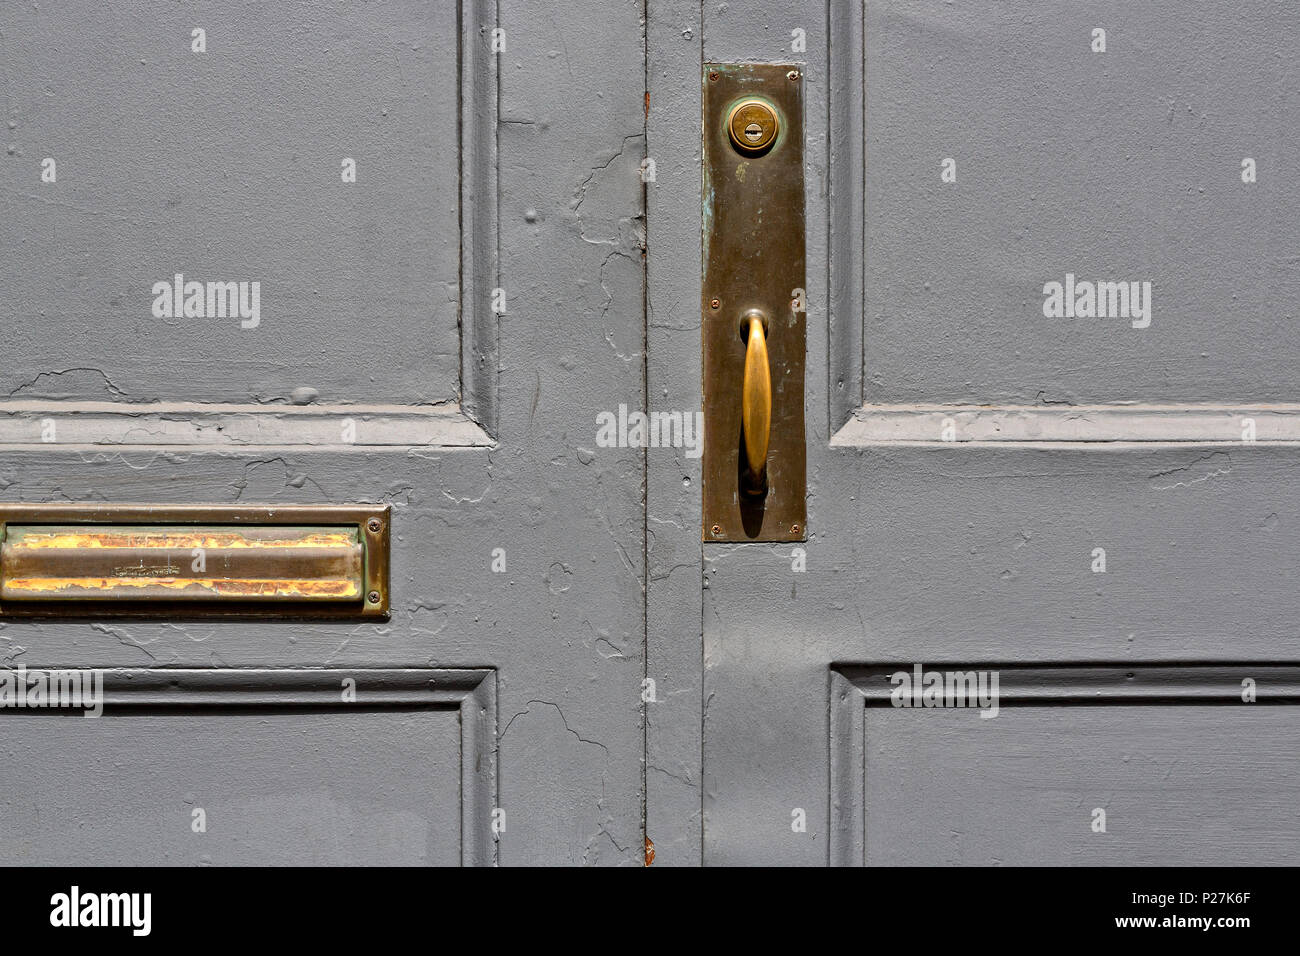 Close up of an Entry Door on a Cast Iron Building, Gray Paint, Wood Paneled, Old Brass Door Knob and Lock, Mail Slot.  Soho, Manhattan, New York City. Stock Photo